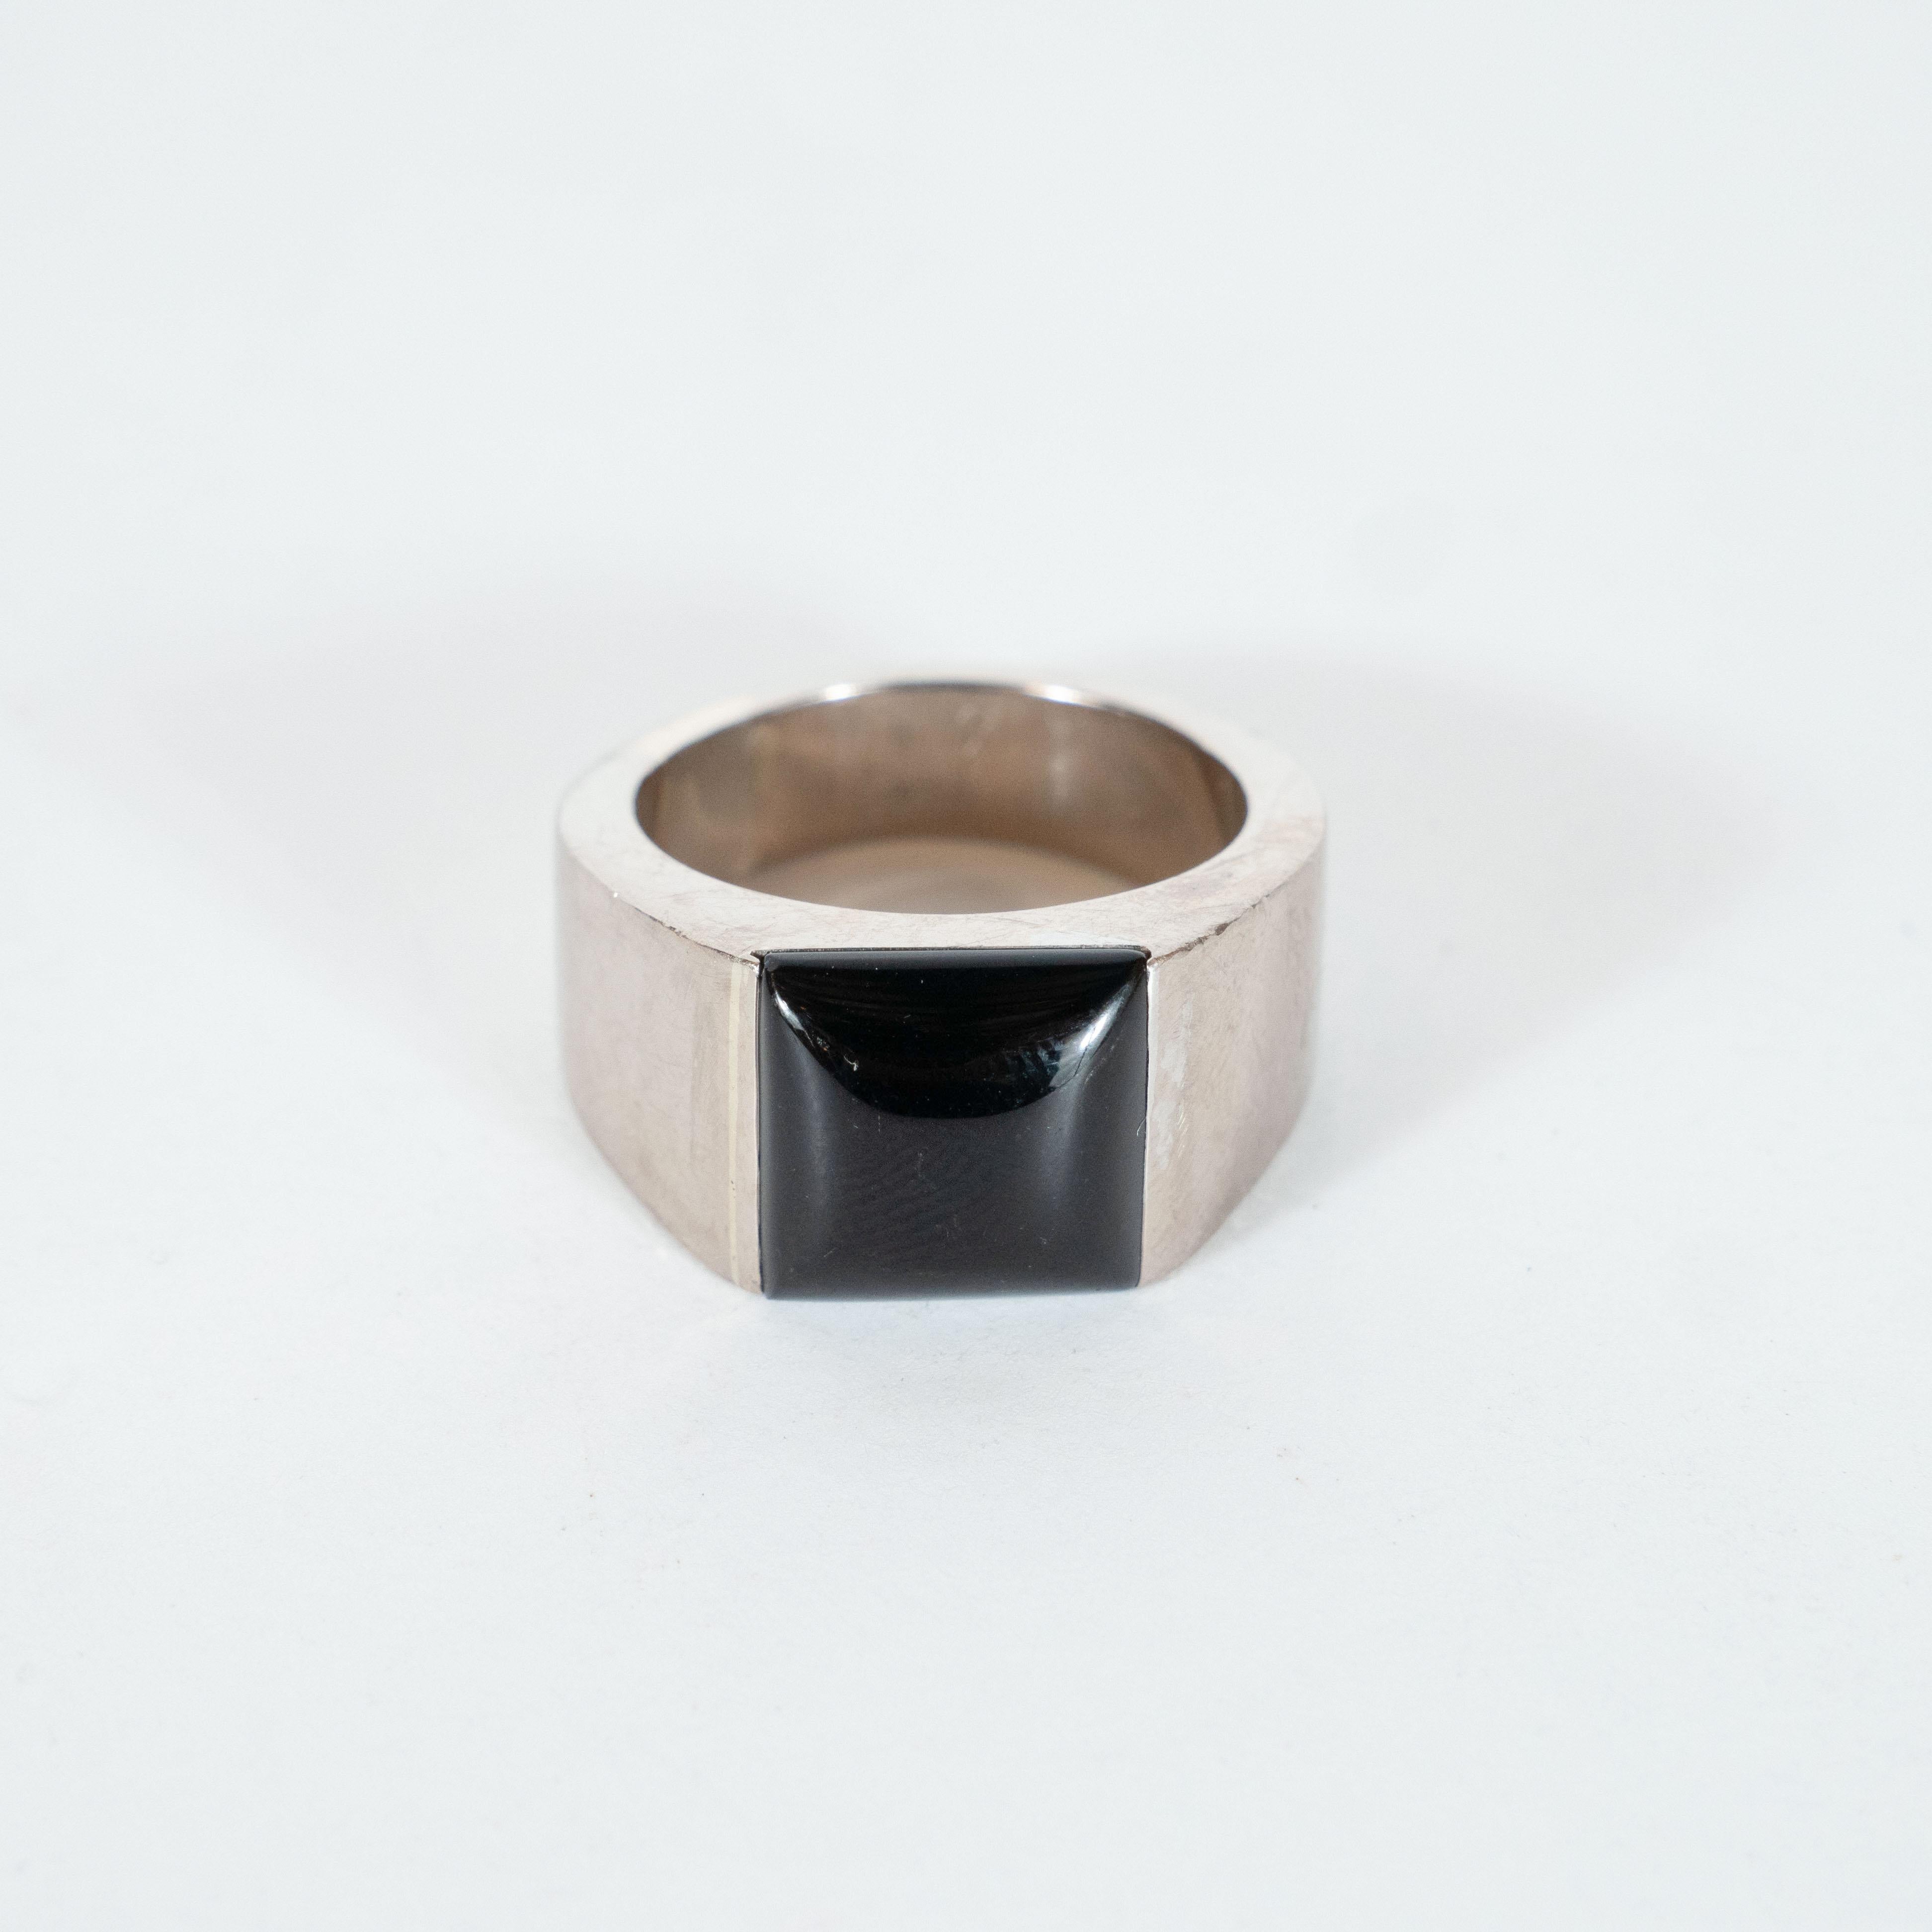 This elegant modernist ring was realized by Cartier- one of the world's finest purveyors of jewelry since its founding in 1847- in France. It features a 18kt white gold body fitted a concave square black onyx. With its neutral palate, impeccable